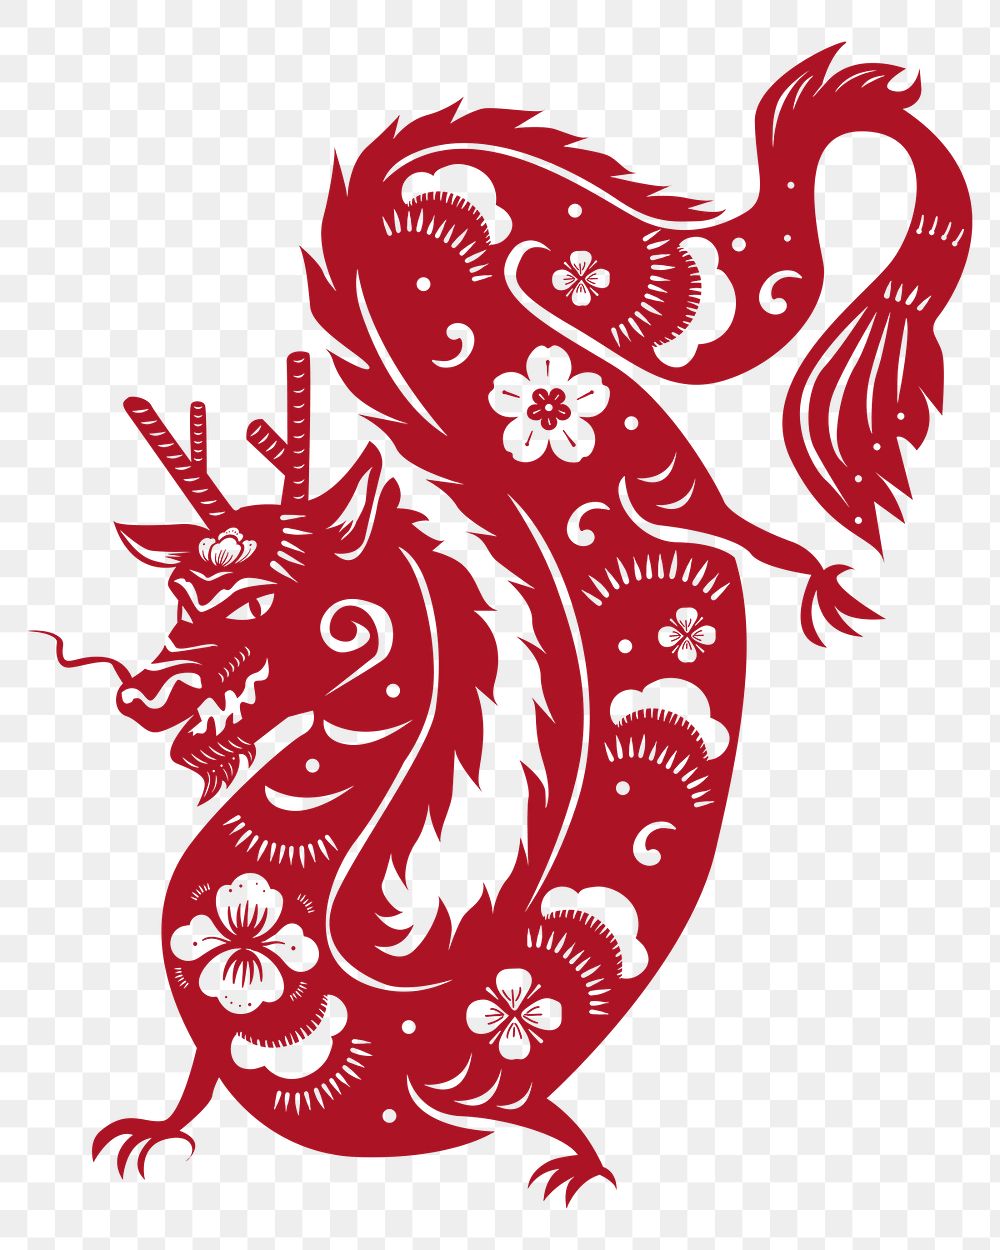 Chinese Zodiac Dragon Images  Free Photos, PNG Stickers, Wallpapers &  Backgrounds - rawpixel